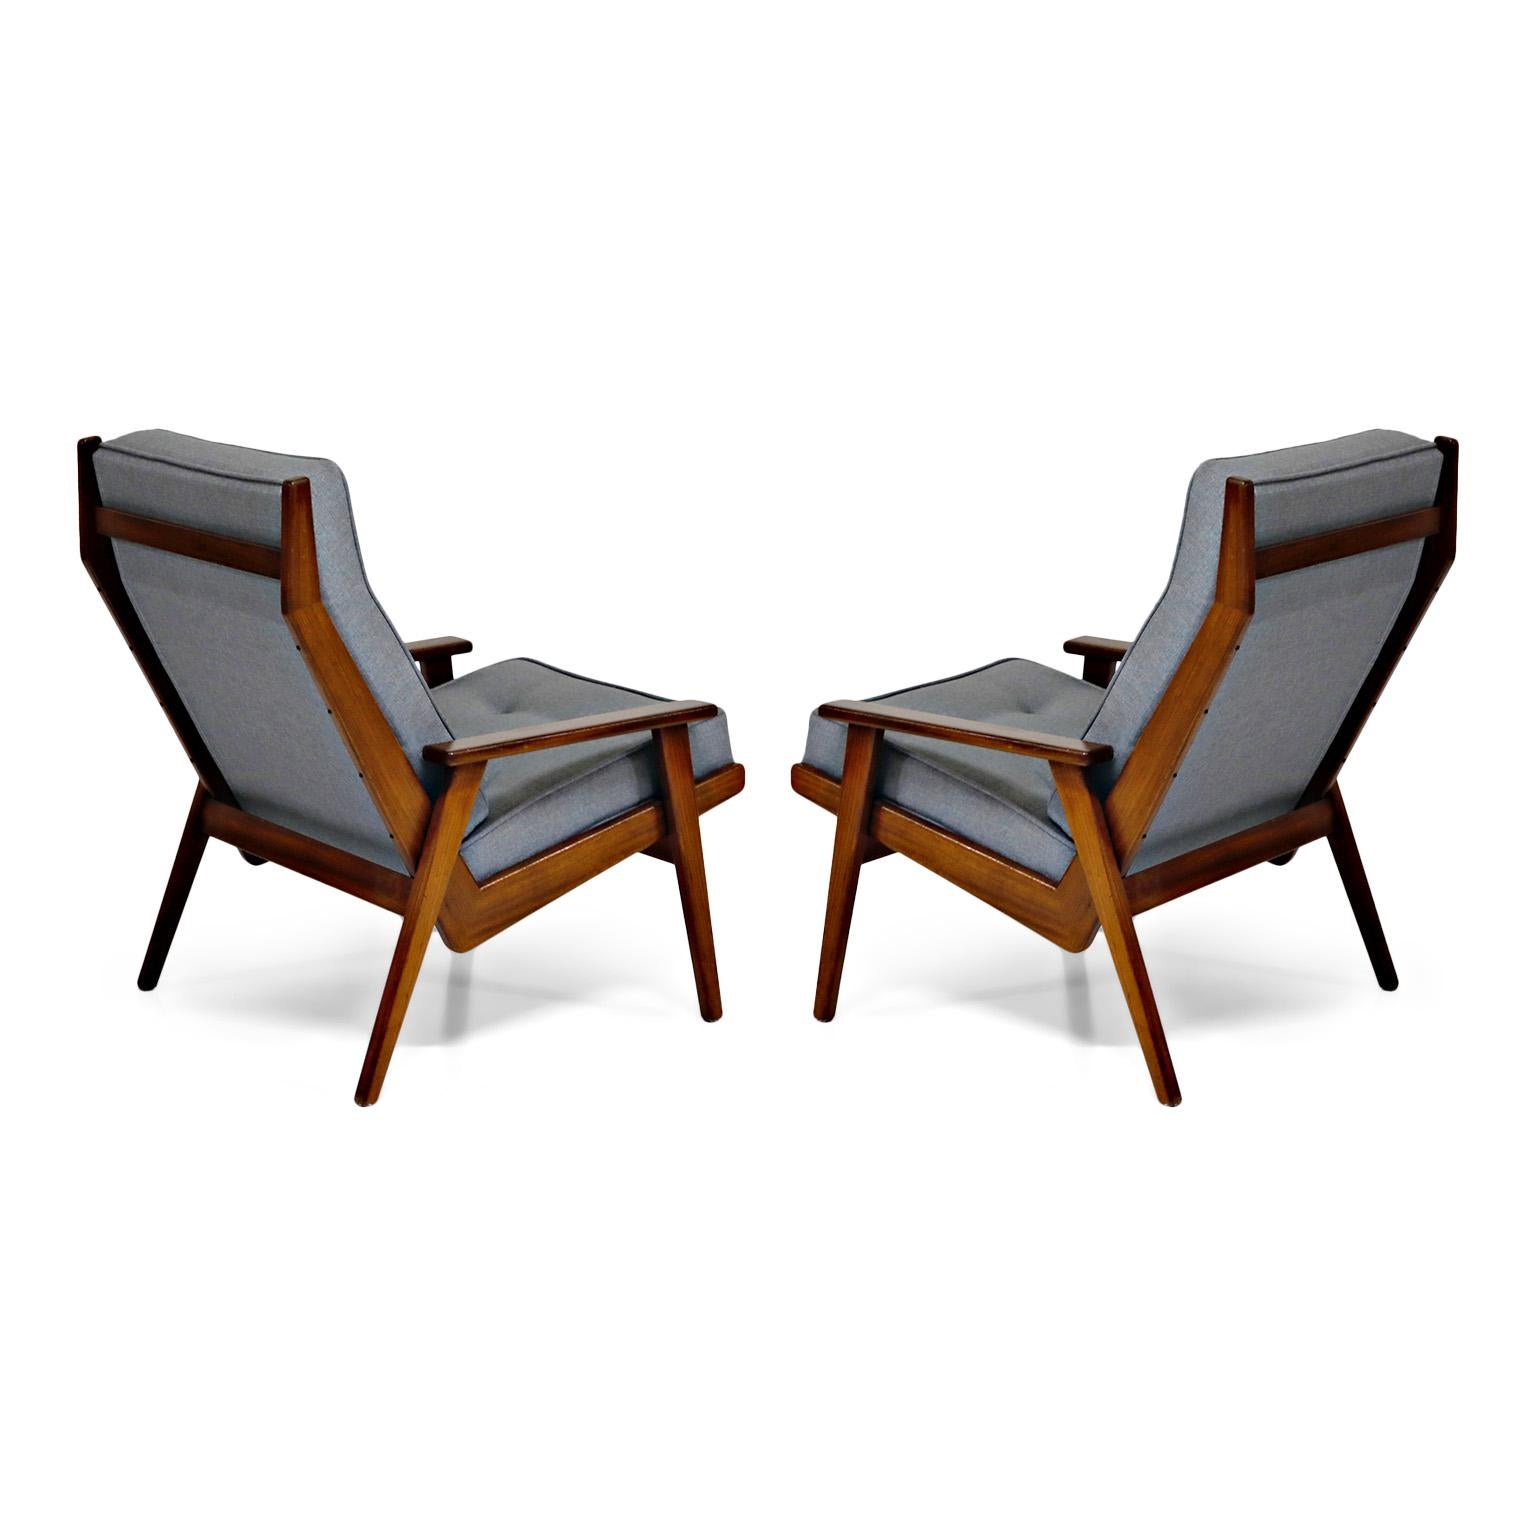 Mid-20th Century Pair of Lotus Chairs by Robert Parry for Gelderland, Denmark 1950s, Restored